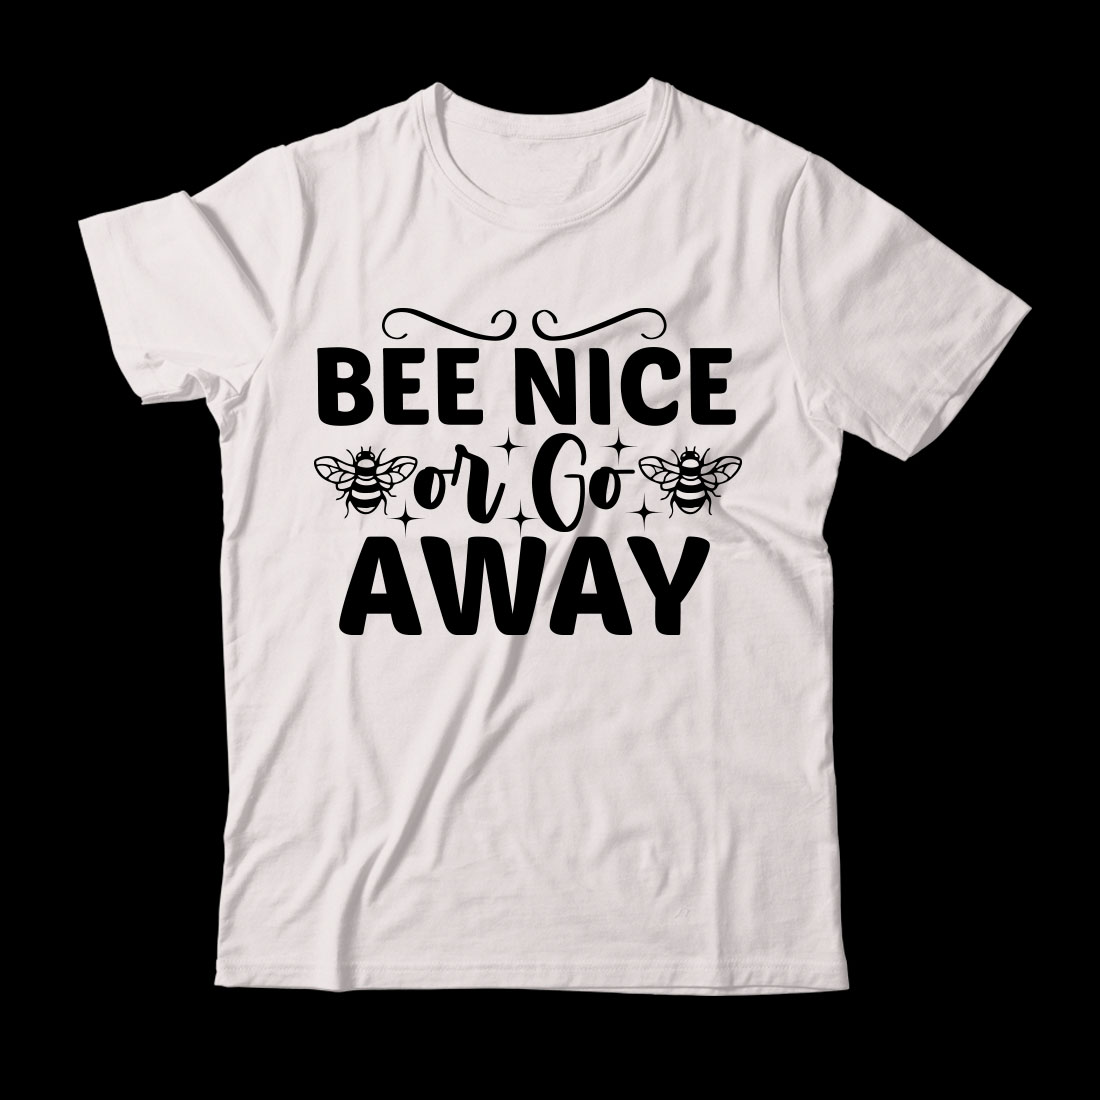 White t - shirt that says bee nice or go away.